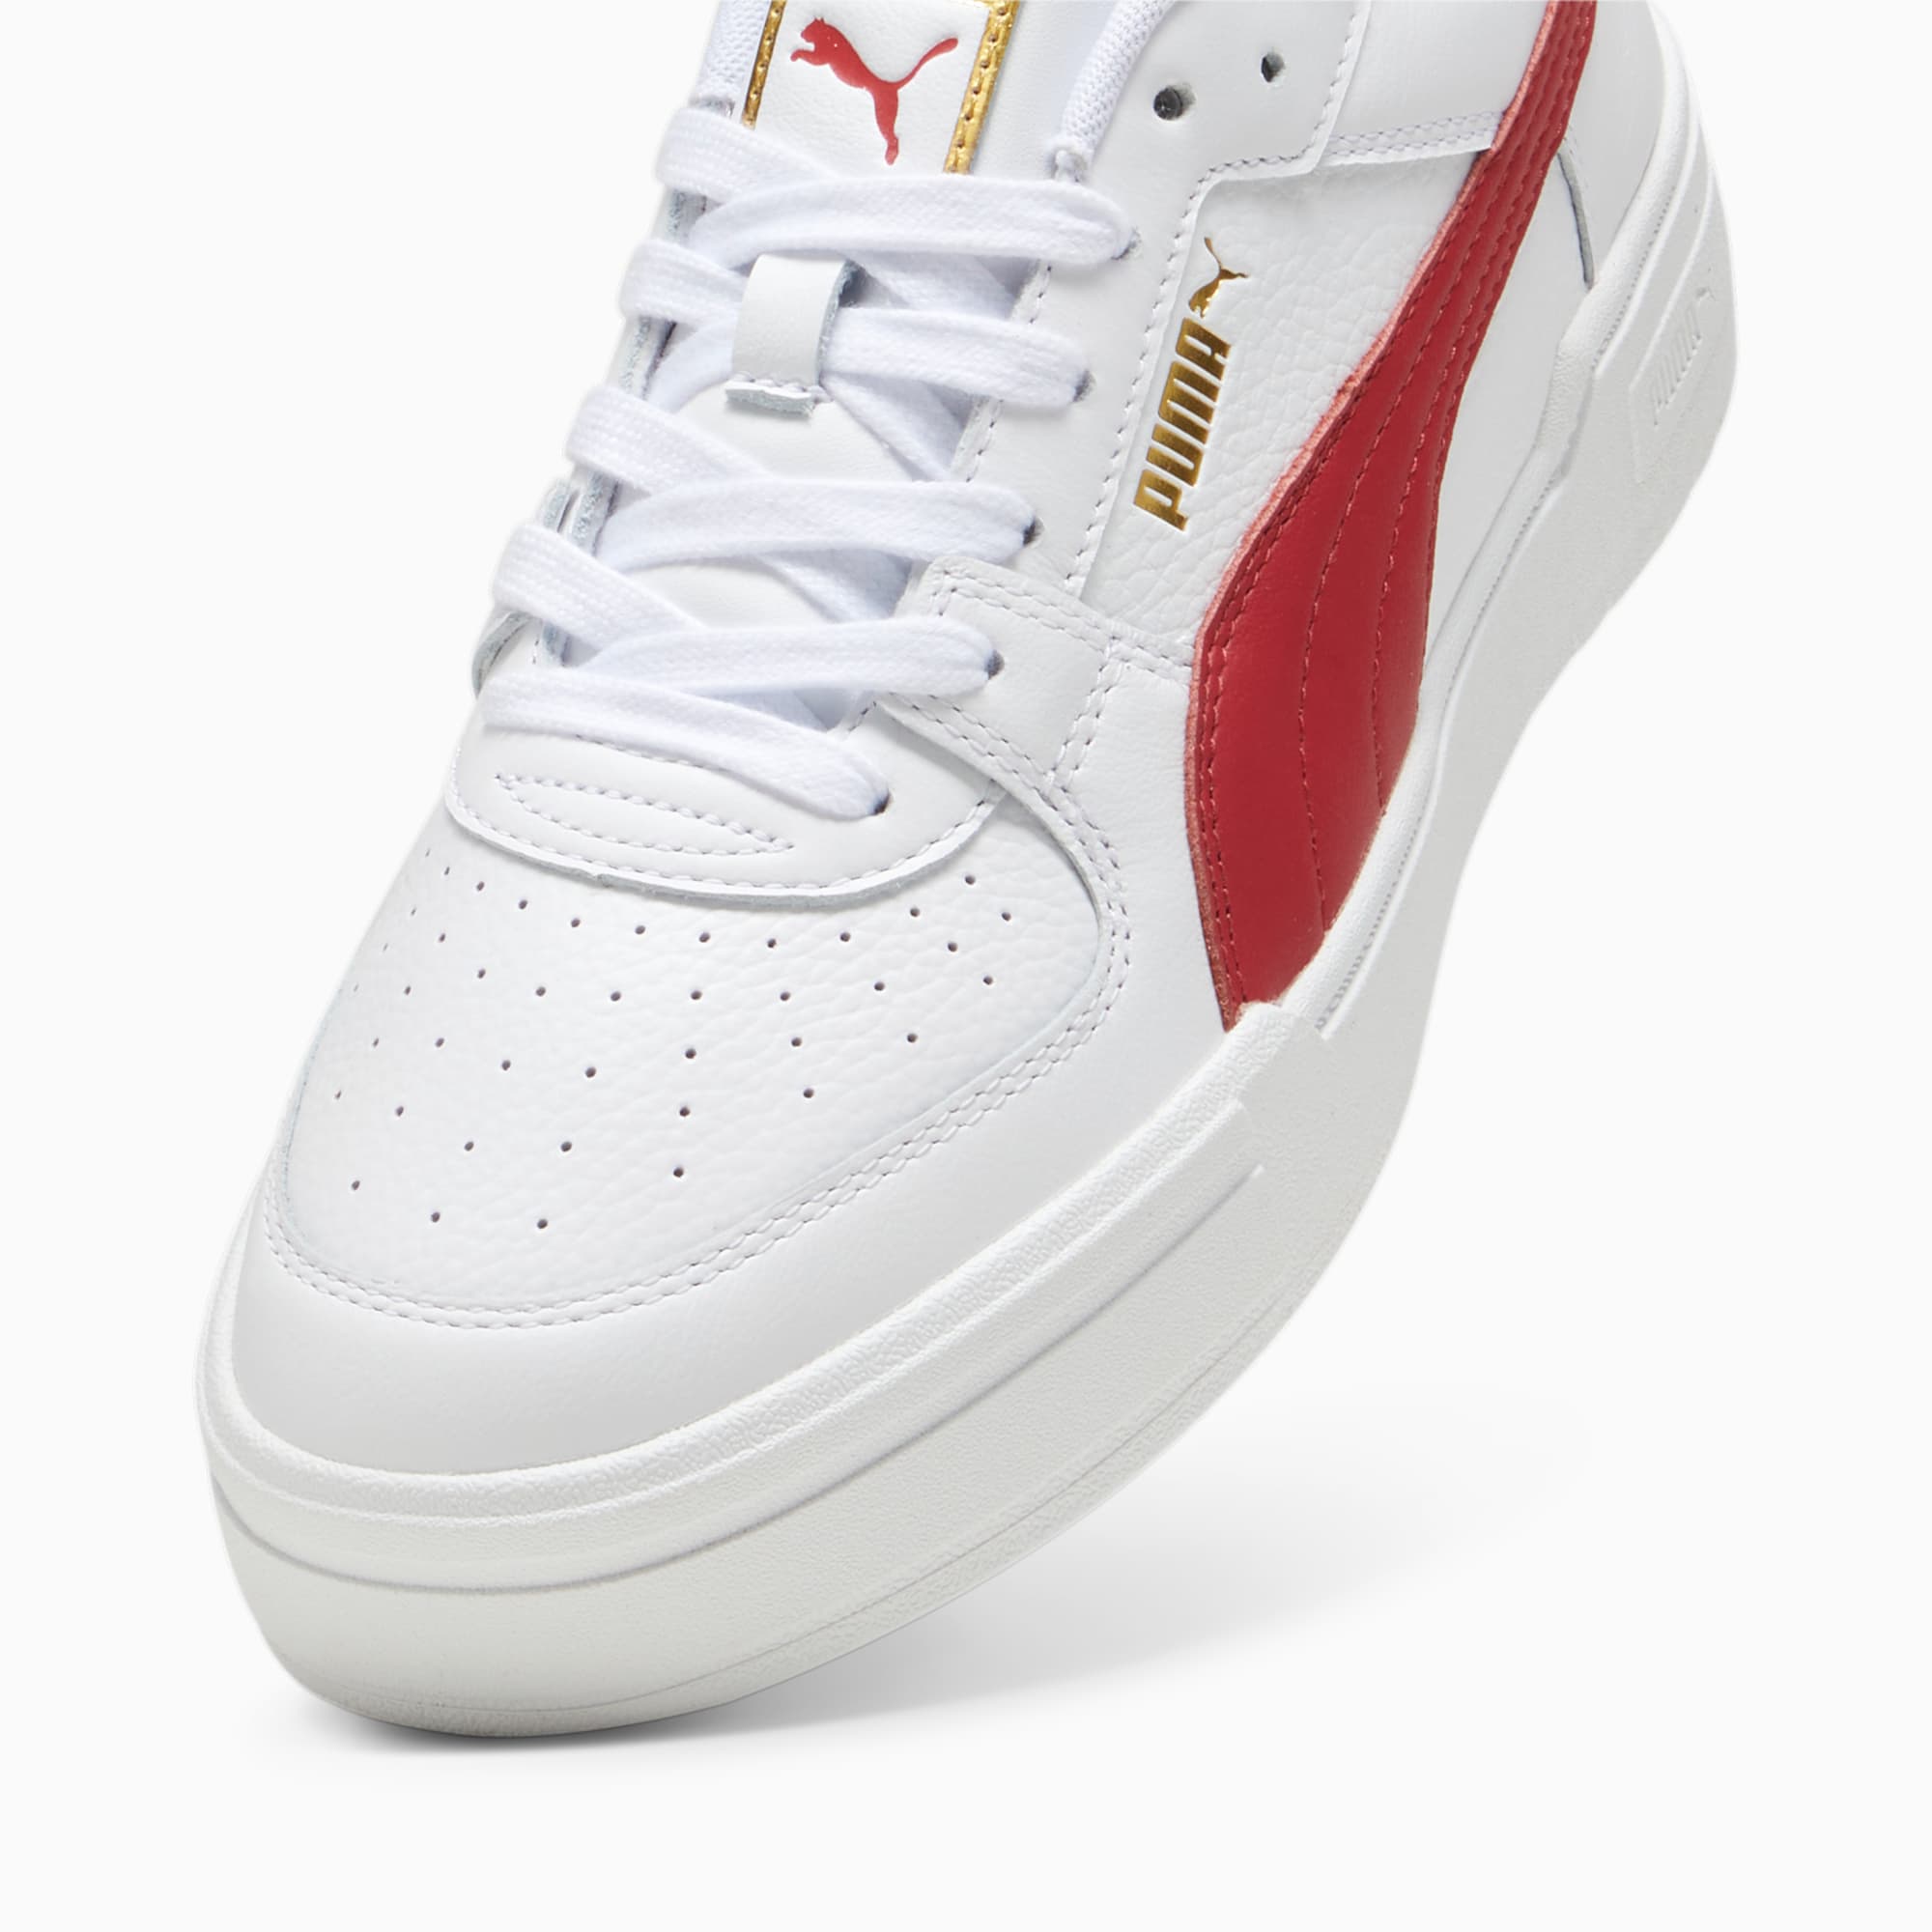 PUMA Chaussure Sneakers CA Pro Classic, Or/Rouge/Blanc